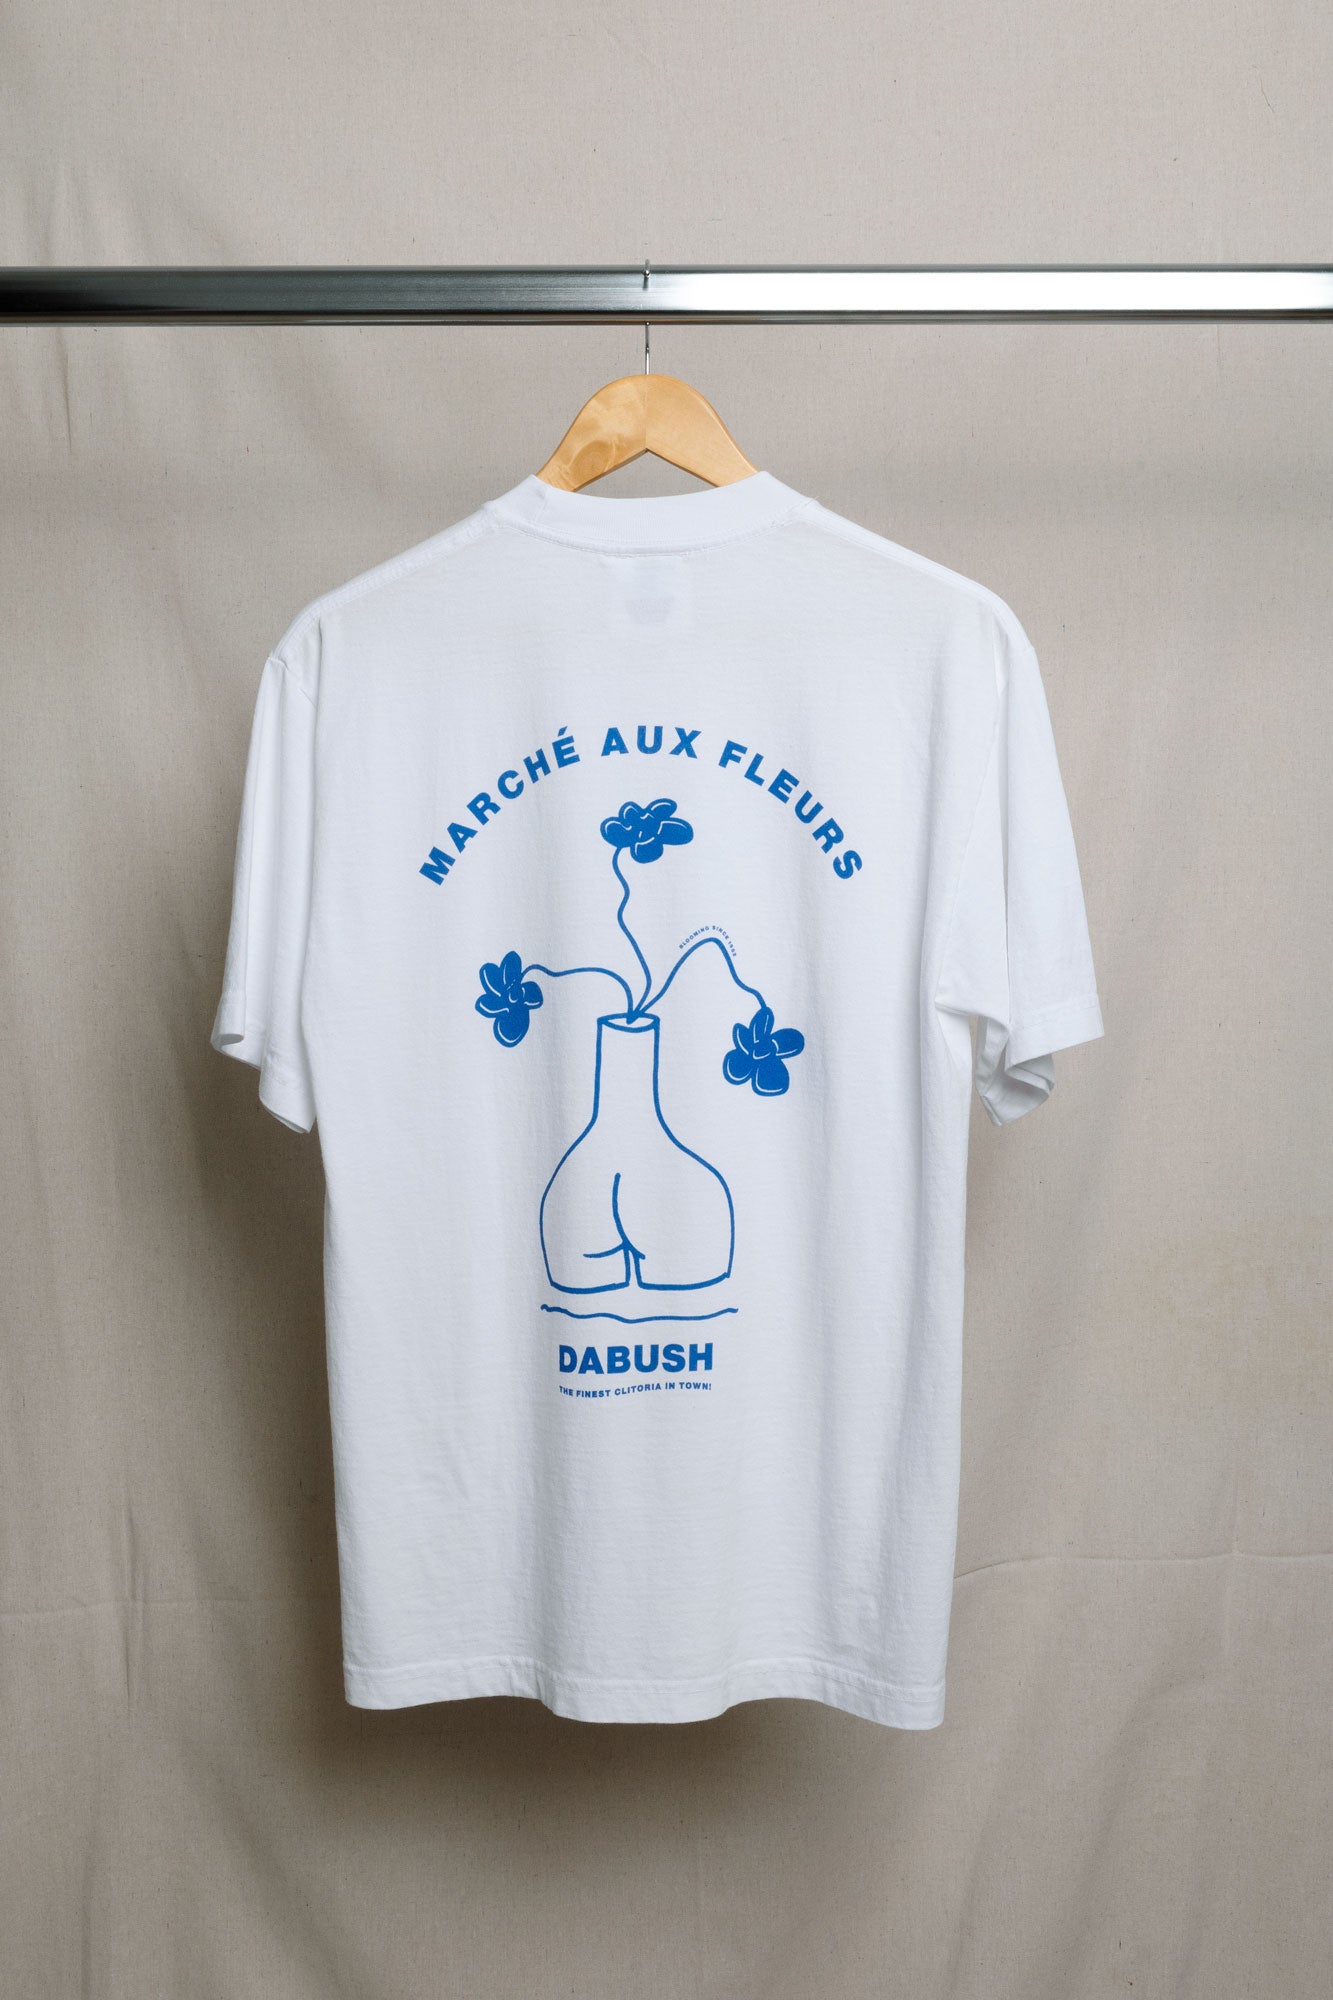 DABUSH FLOWER MARKET T-SHIRT. Marché aux fleurs le tée-shirt. 100% Cotton, oversized tee with back and front print. Made in Tel aviv, Israel.